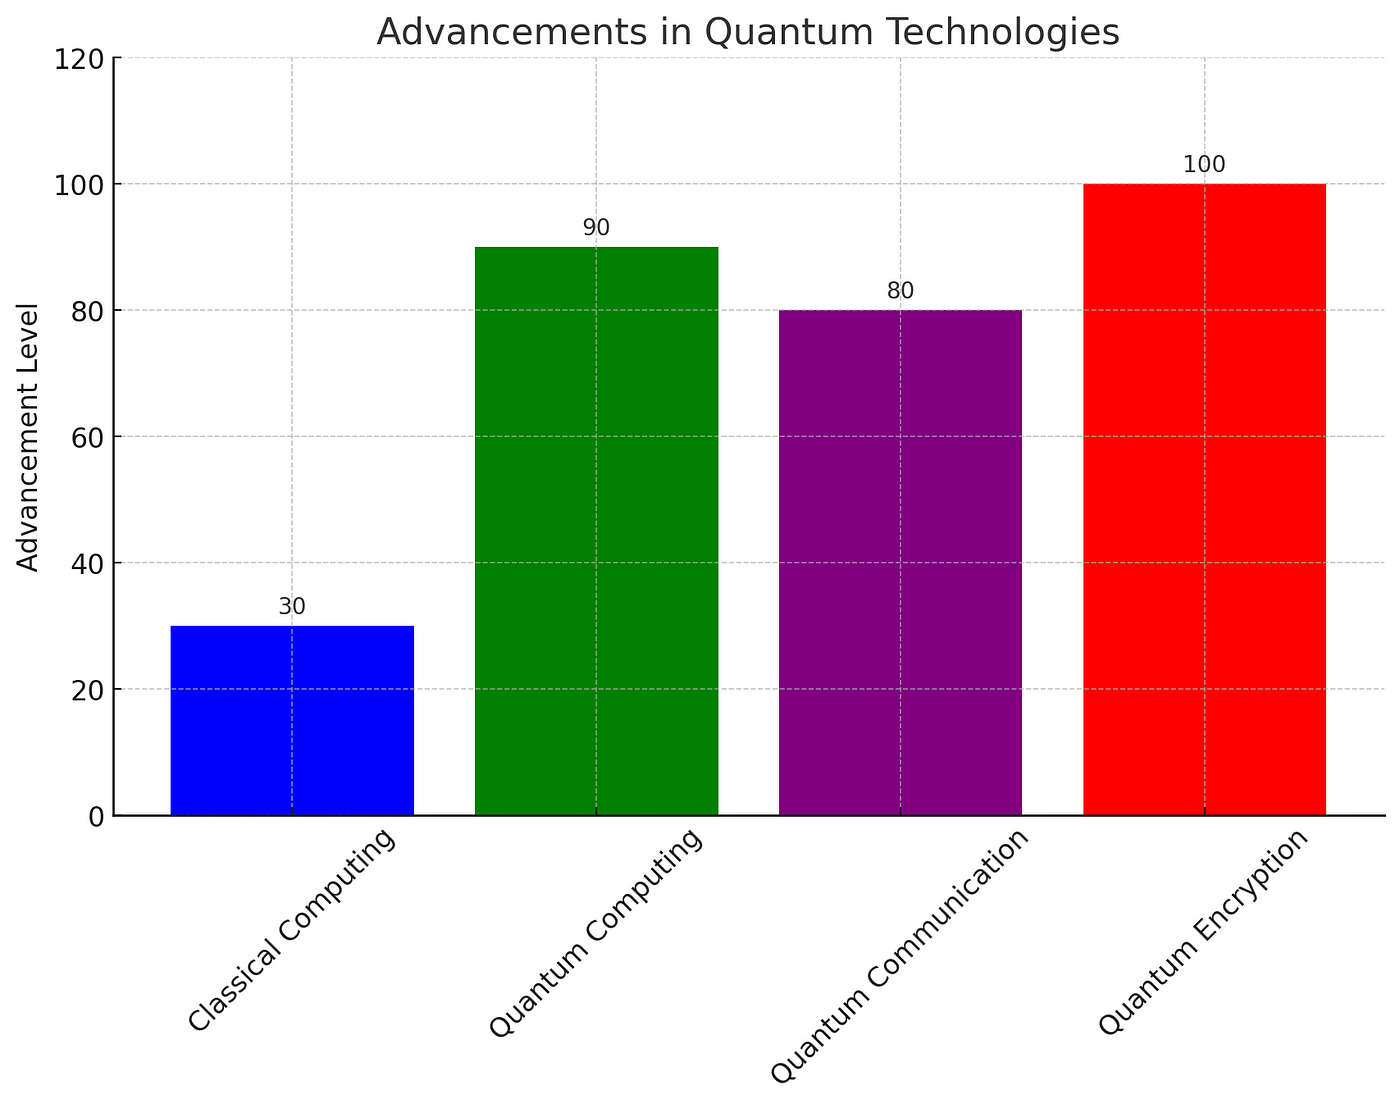 Bar graph titled ‘Advancements in Quantum Technologies’ comparing four different fields. The graph shows Classical Computing with a value of 30, Quantum Computing at 90, Quantum Communication at 80, and Quantum Encryption at 100, on a scale of advancement level. Each field is represented by a different colored bar: blue for Classical Computing, green for Quantum Computing, purple for Quantum Communication, and red for Quantum Encryption. The y-axis represents the advancement level from 0 to 120.